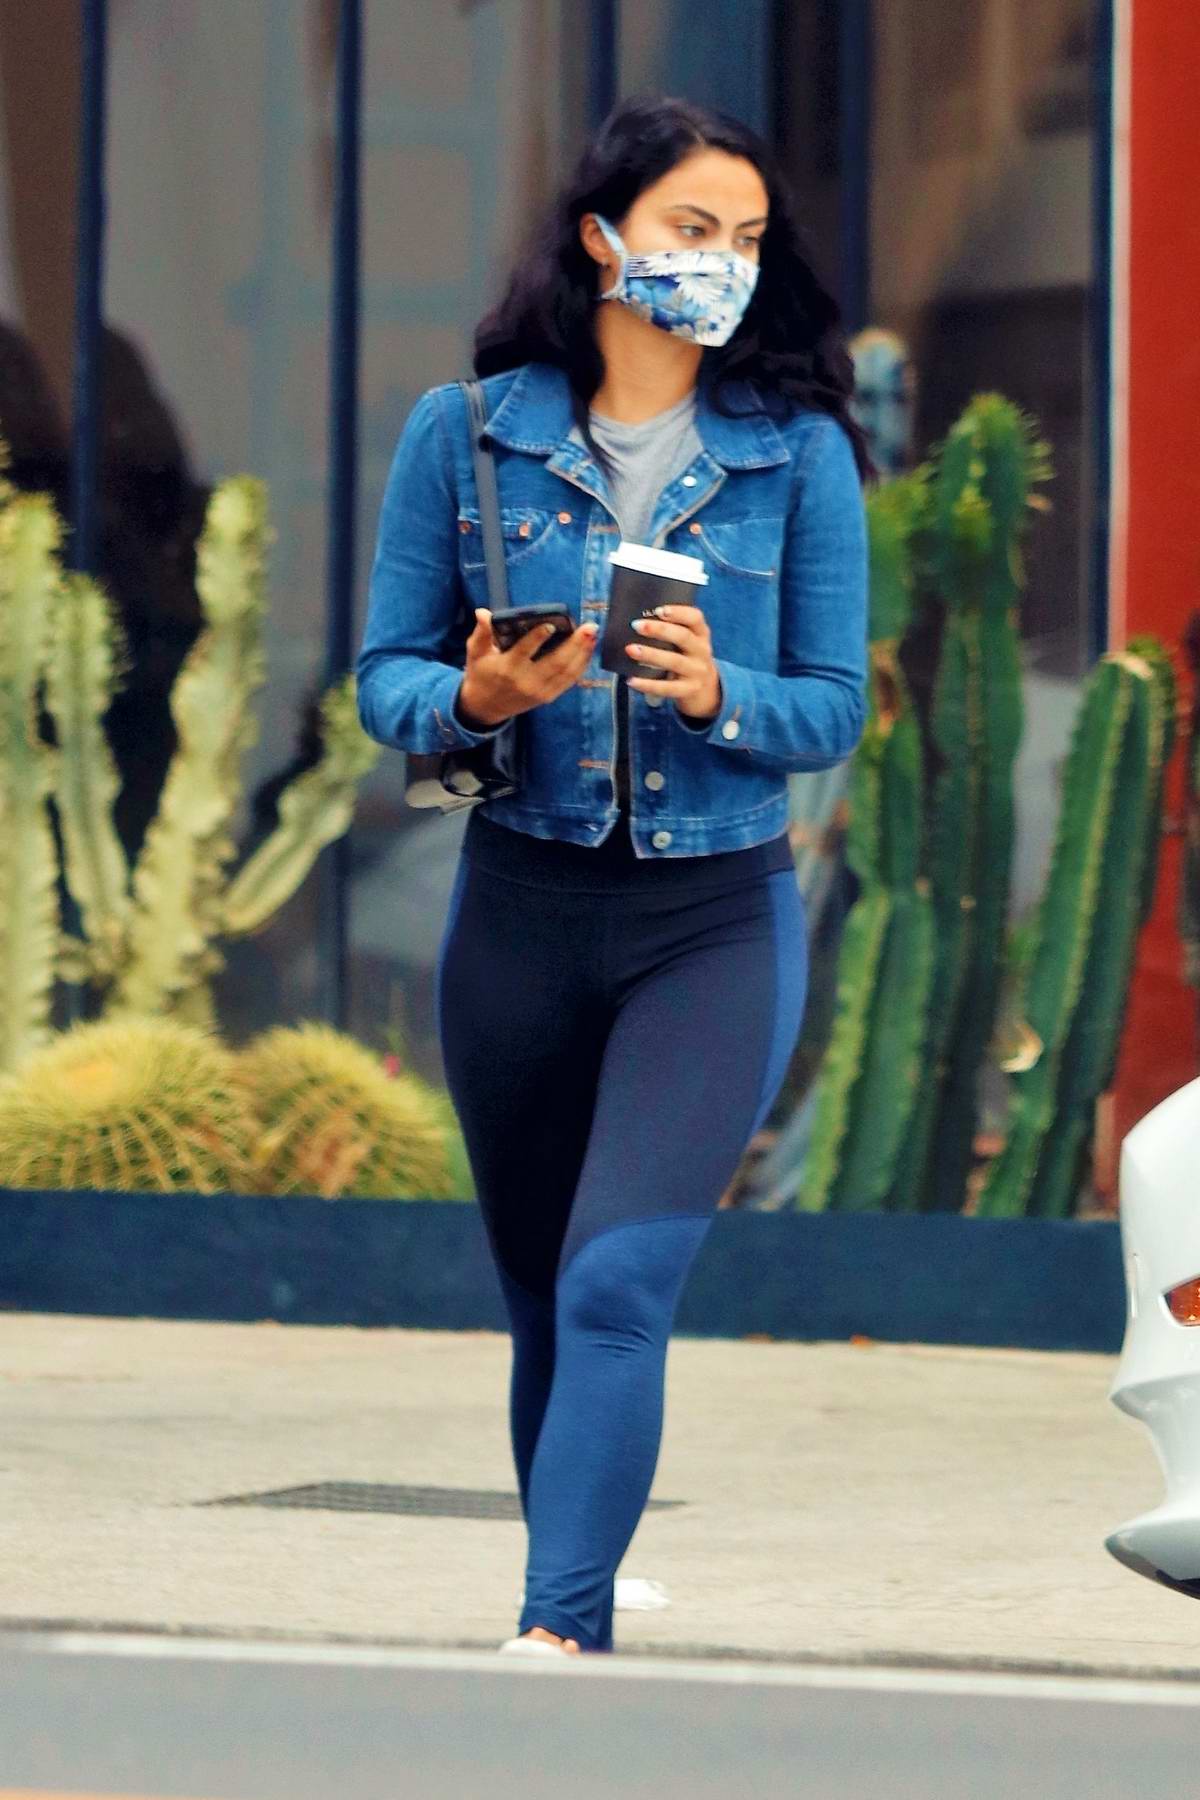 Camila Mendes Shows Off Her Toned Legs In Navy Leggings While Making A Coffee Run In Her Tesla